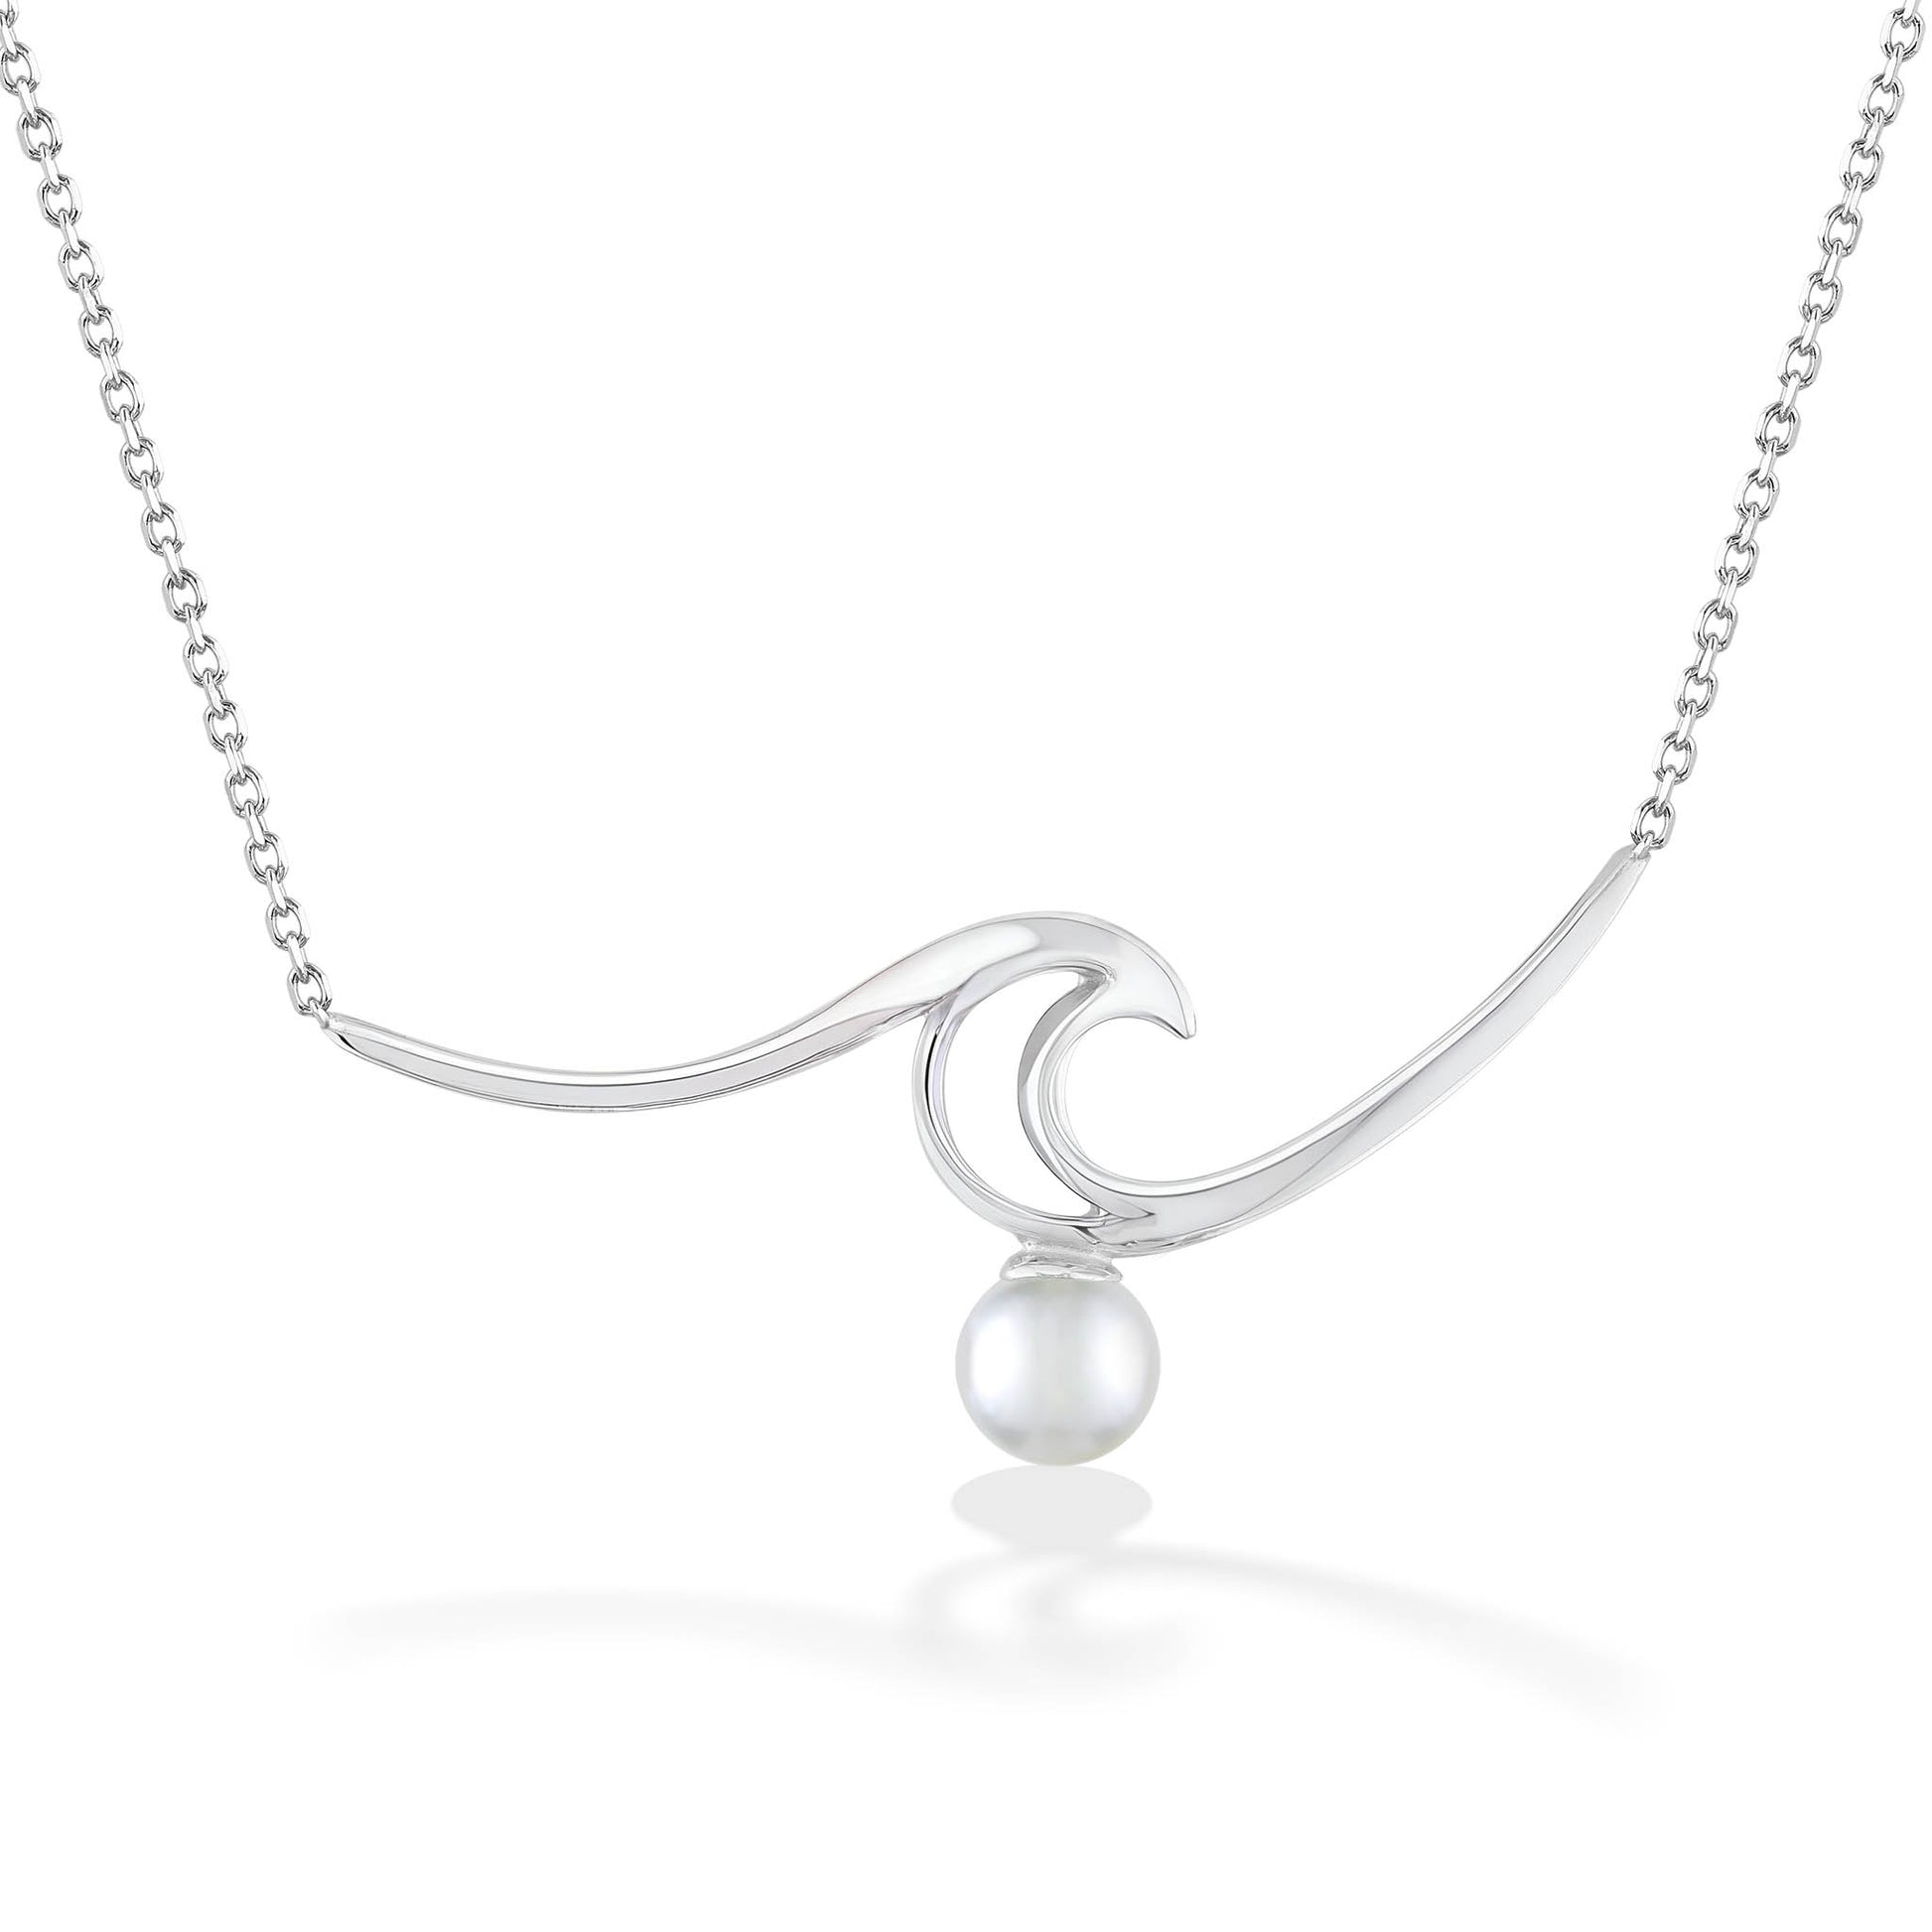 00709 - 14K White Gold - Swell Necklace